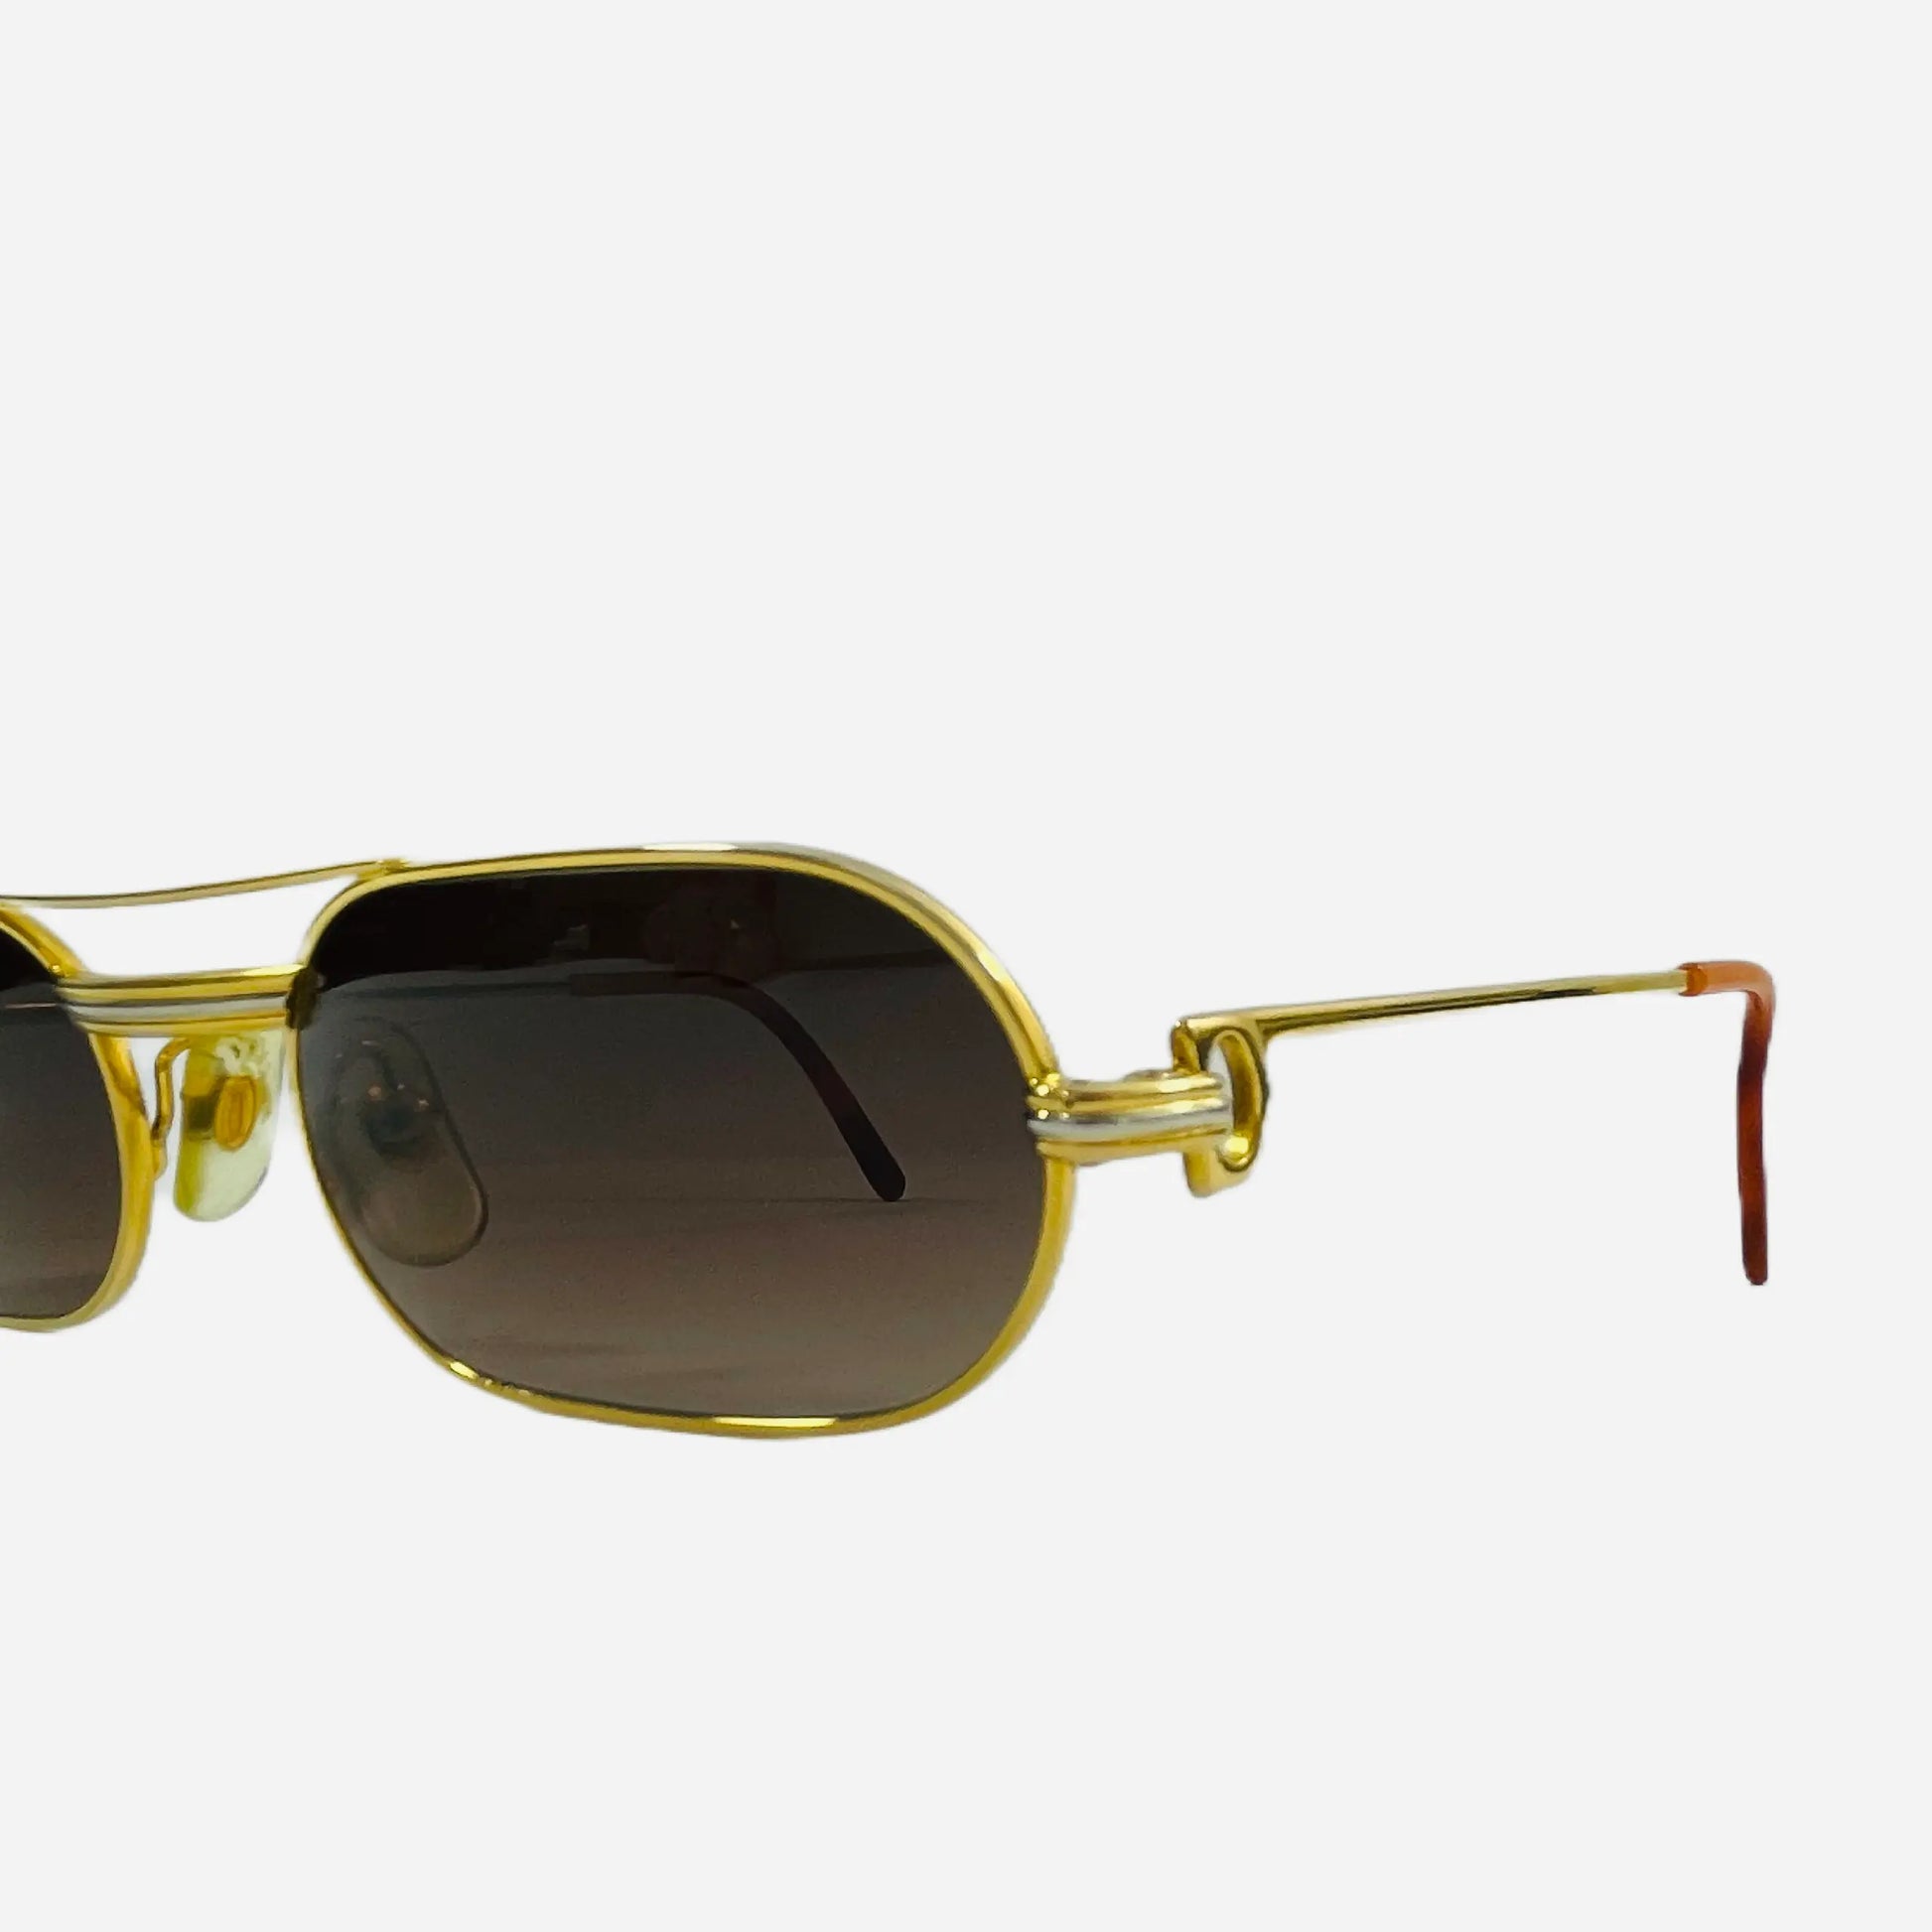 Vintage-Cartier-Ascot-Must-Louis-Sonnenbrille-Sunglasses-22CT-Gold-Plated-Custom-the-seekers-side-detail